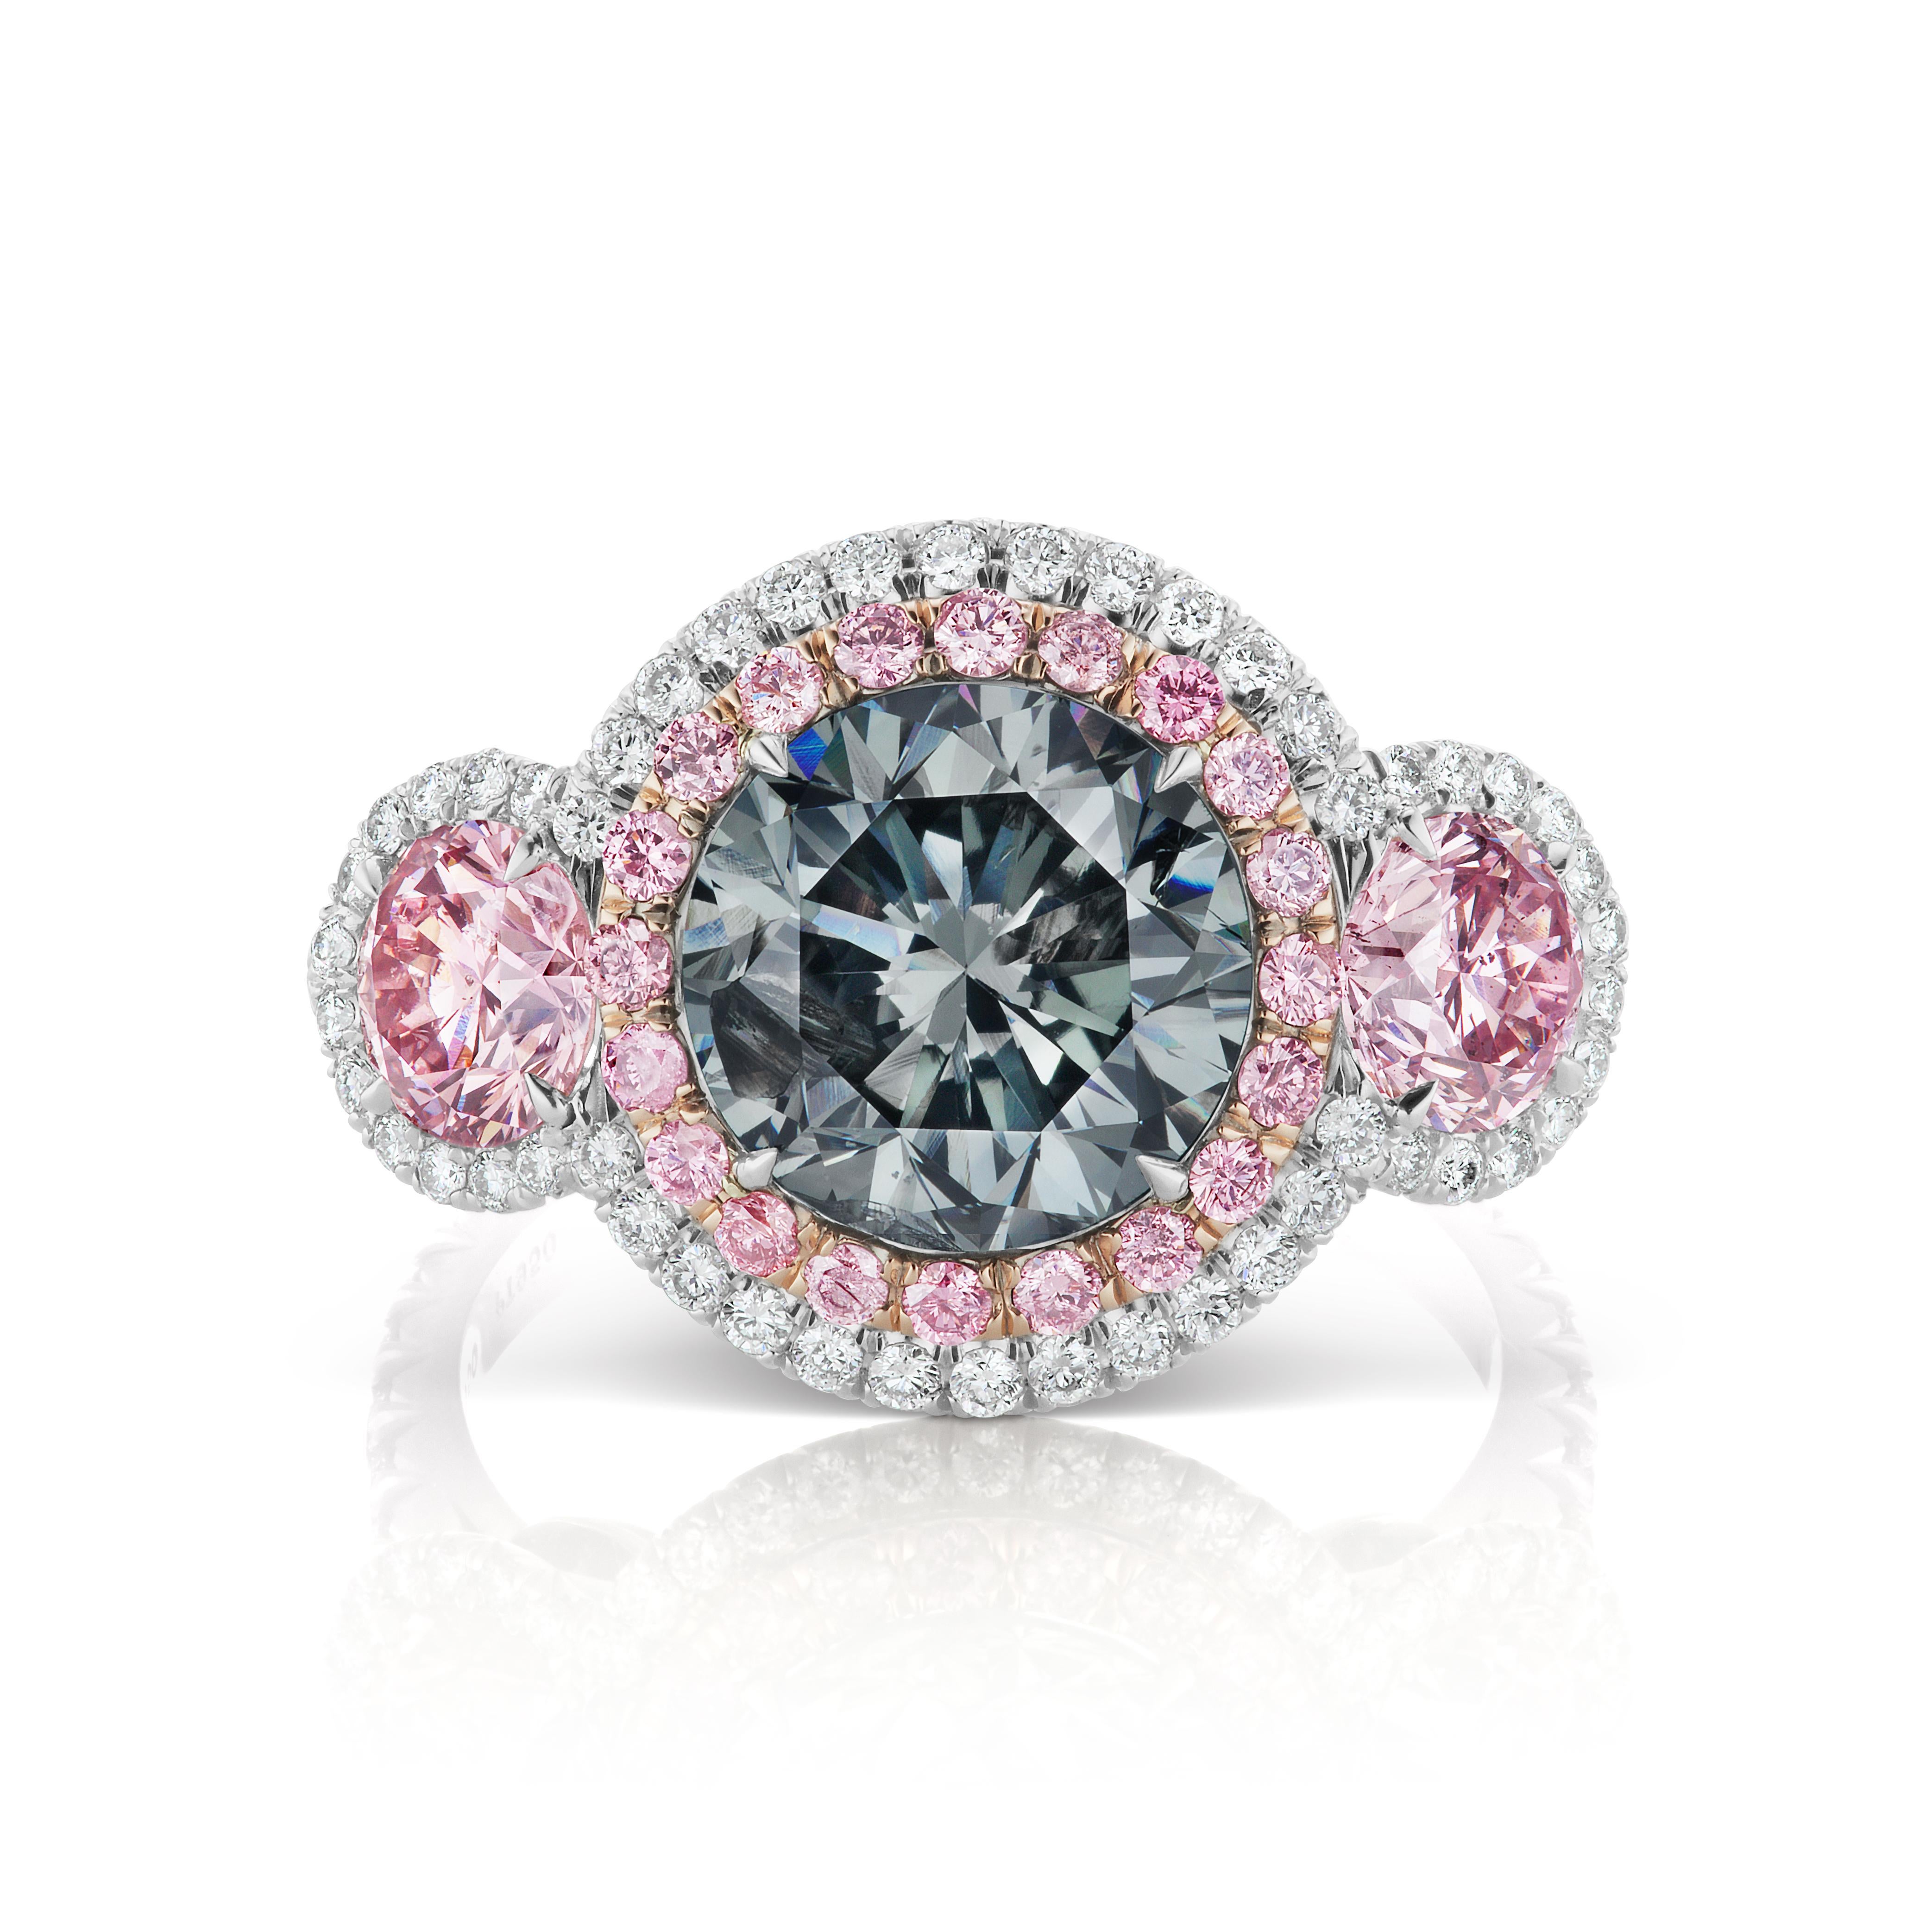 We are pleased to offer this Rare Ladies Platinum & 18k Rose Gold GIA Certified Fancy Blue-Gray & Fancy Intense Purplish Pink Diamond 3 Stone Ring. This stunning ring features a 3.03ct natural fancy blue-gray round brilliant cut diamond center stone